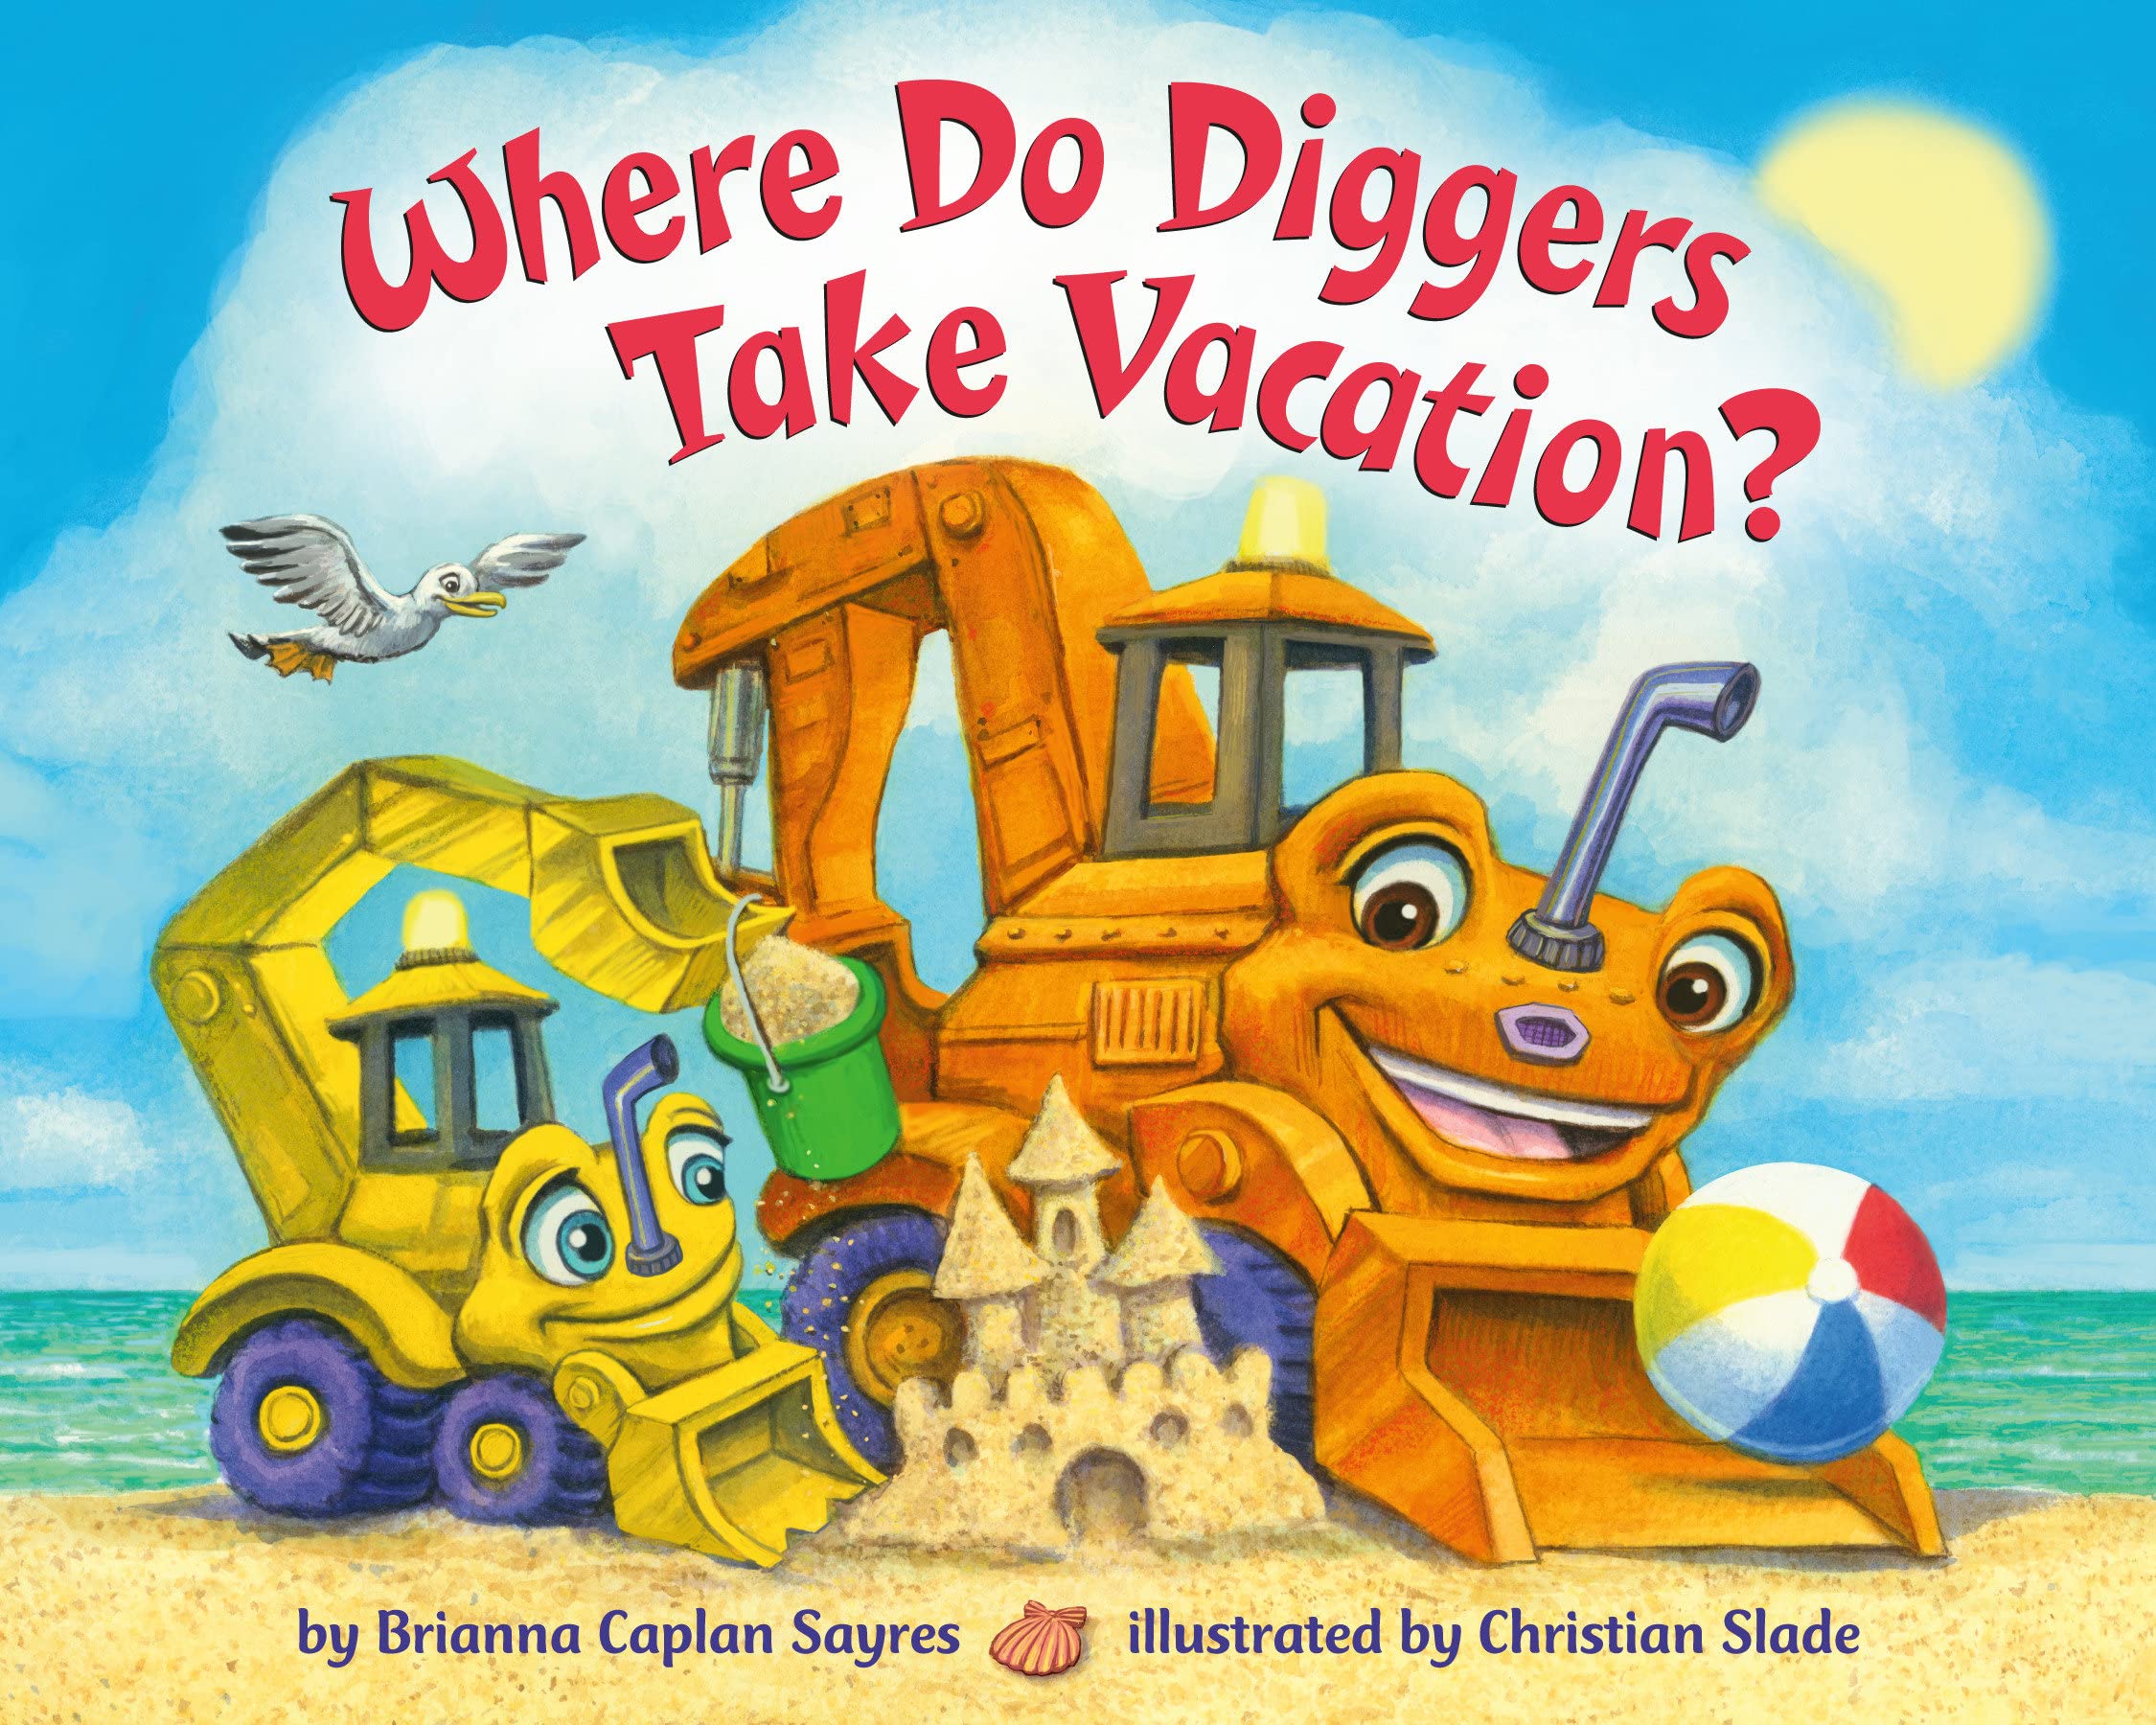 Image for "Where Do Diggers Take Vacation?"